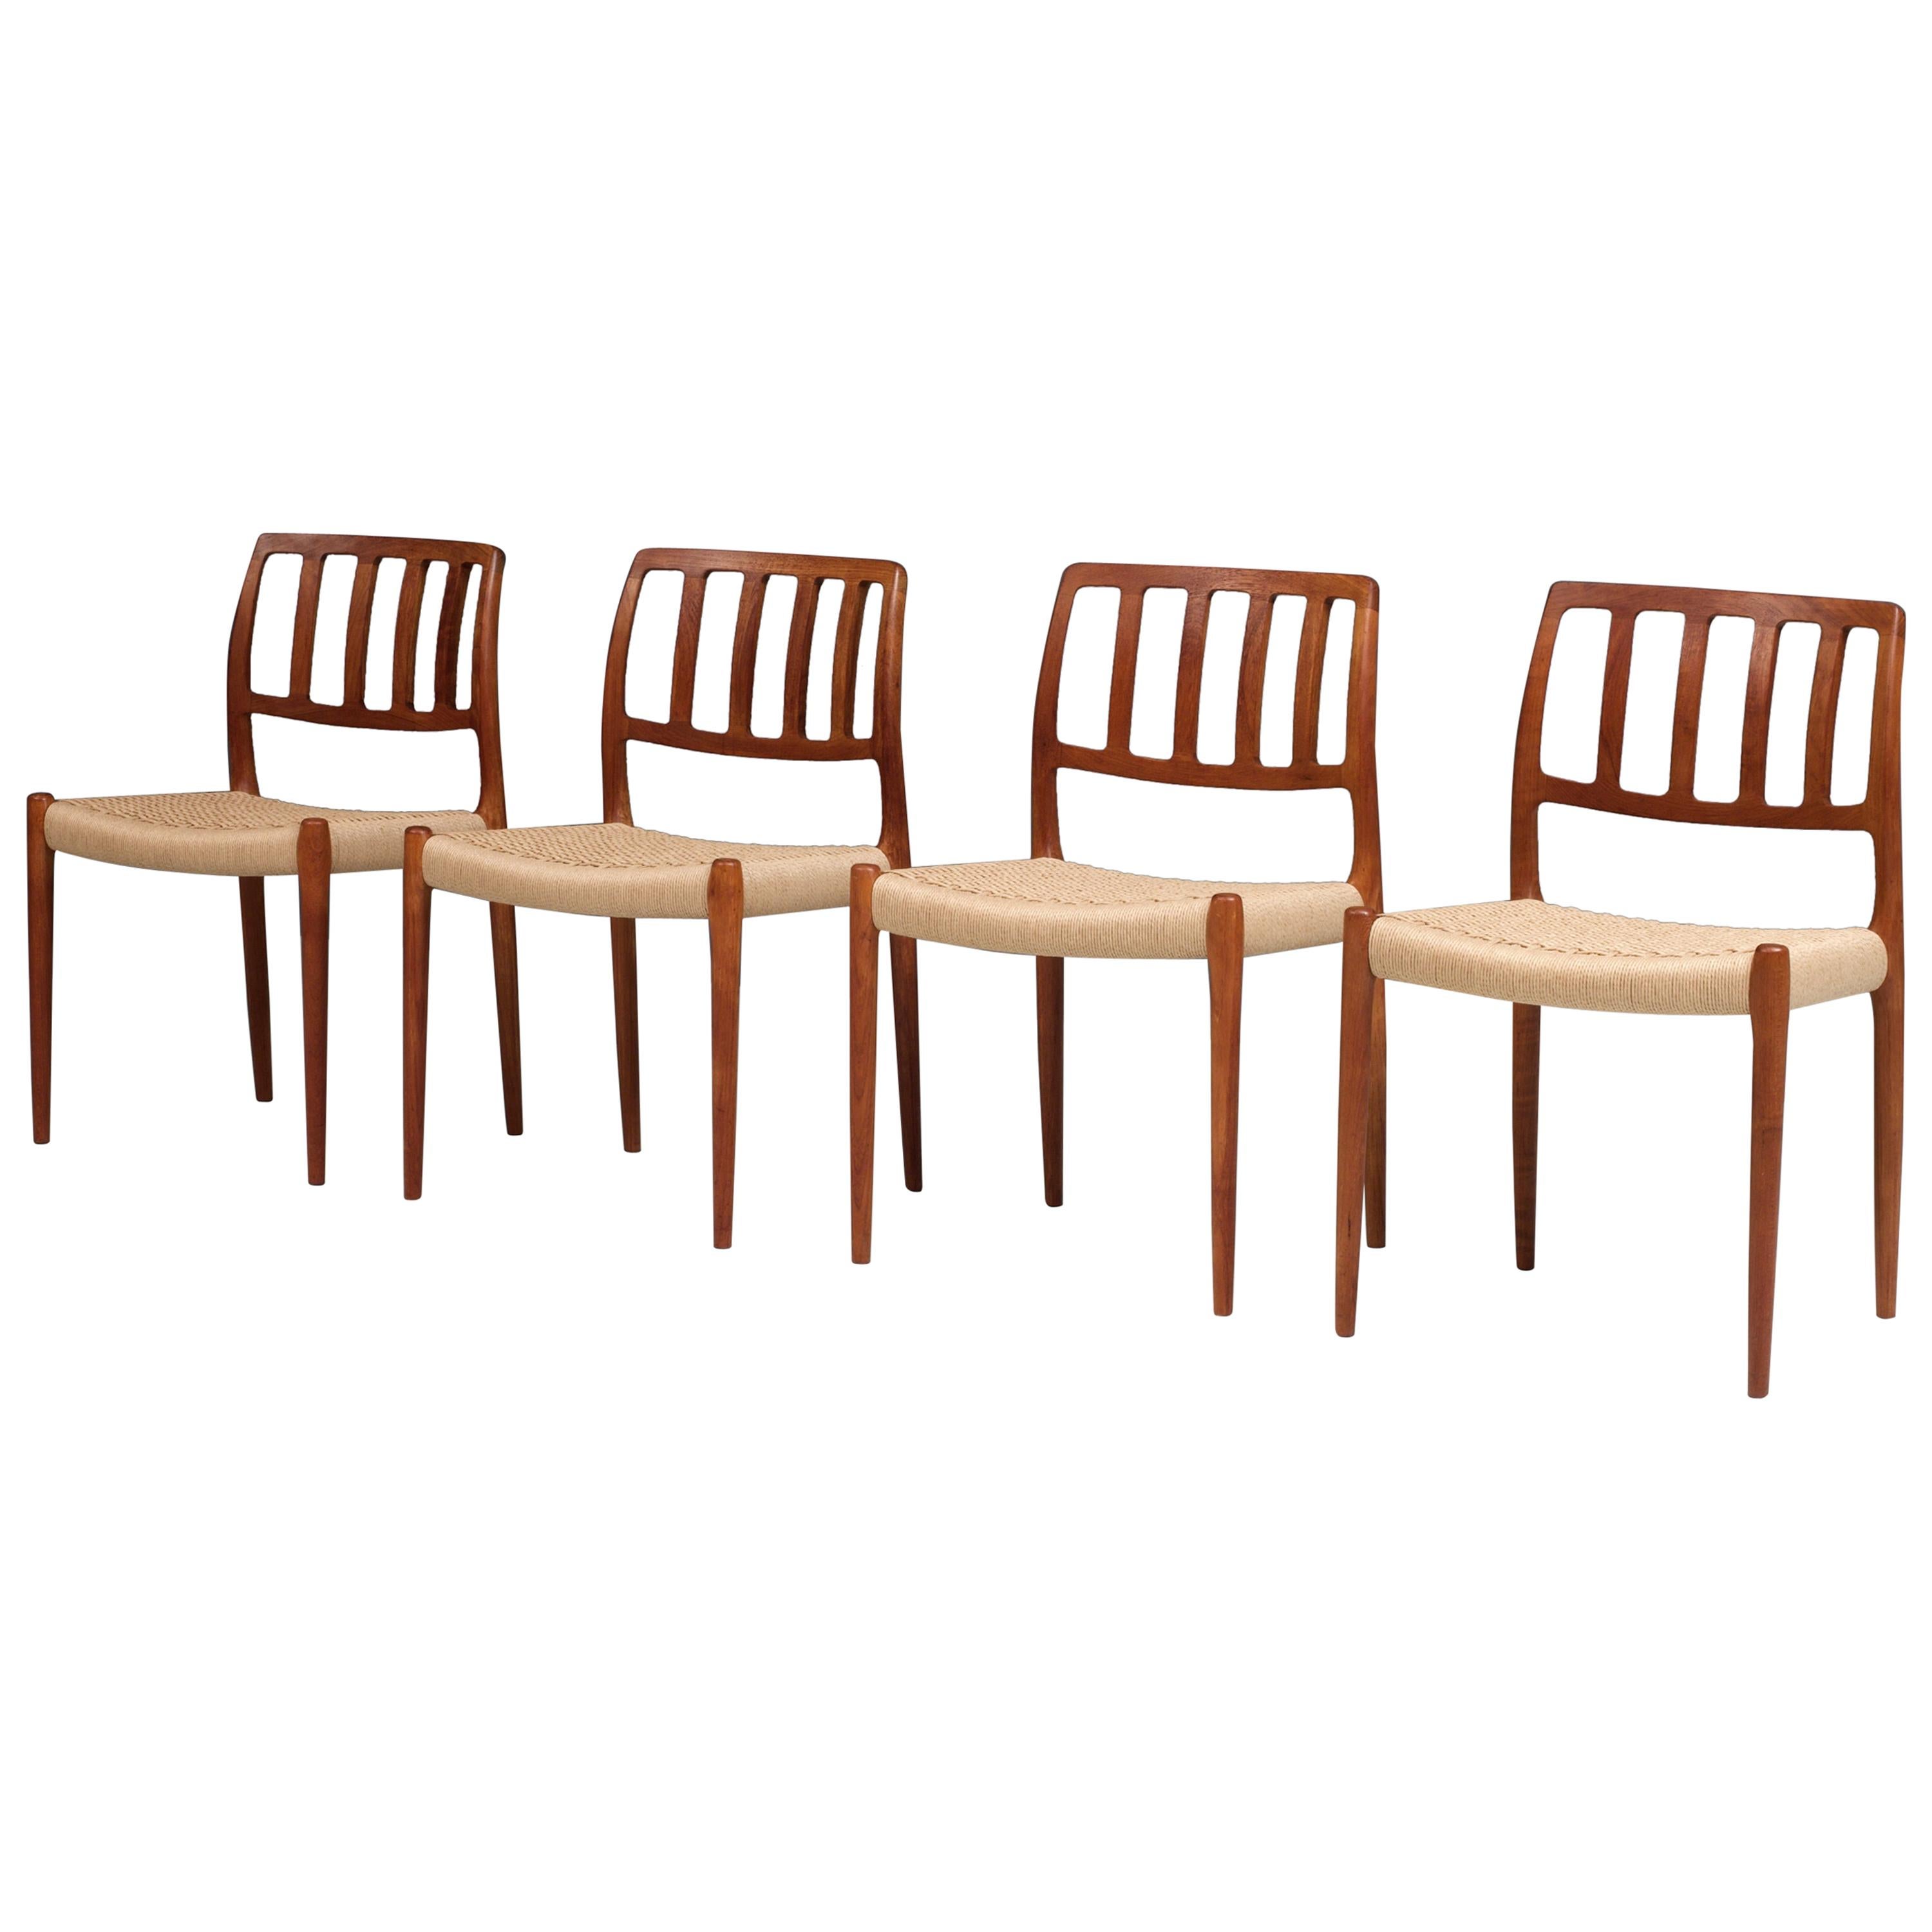 Set of 4 Newly Upholstered Dining Chairs by Niels Otto Møller, Denmark, 1960s For Sale